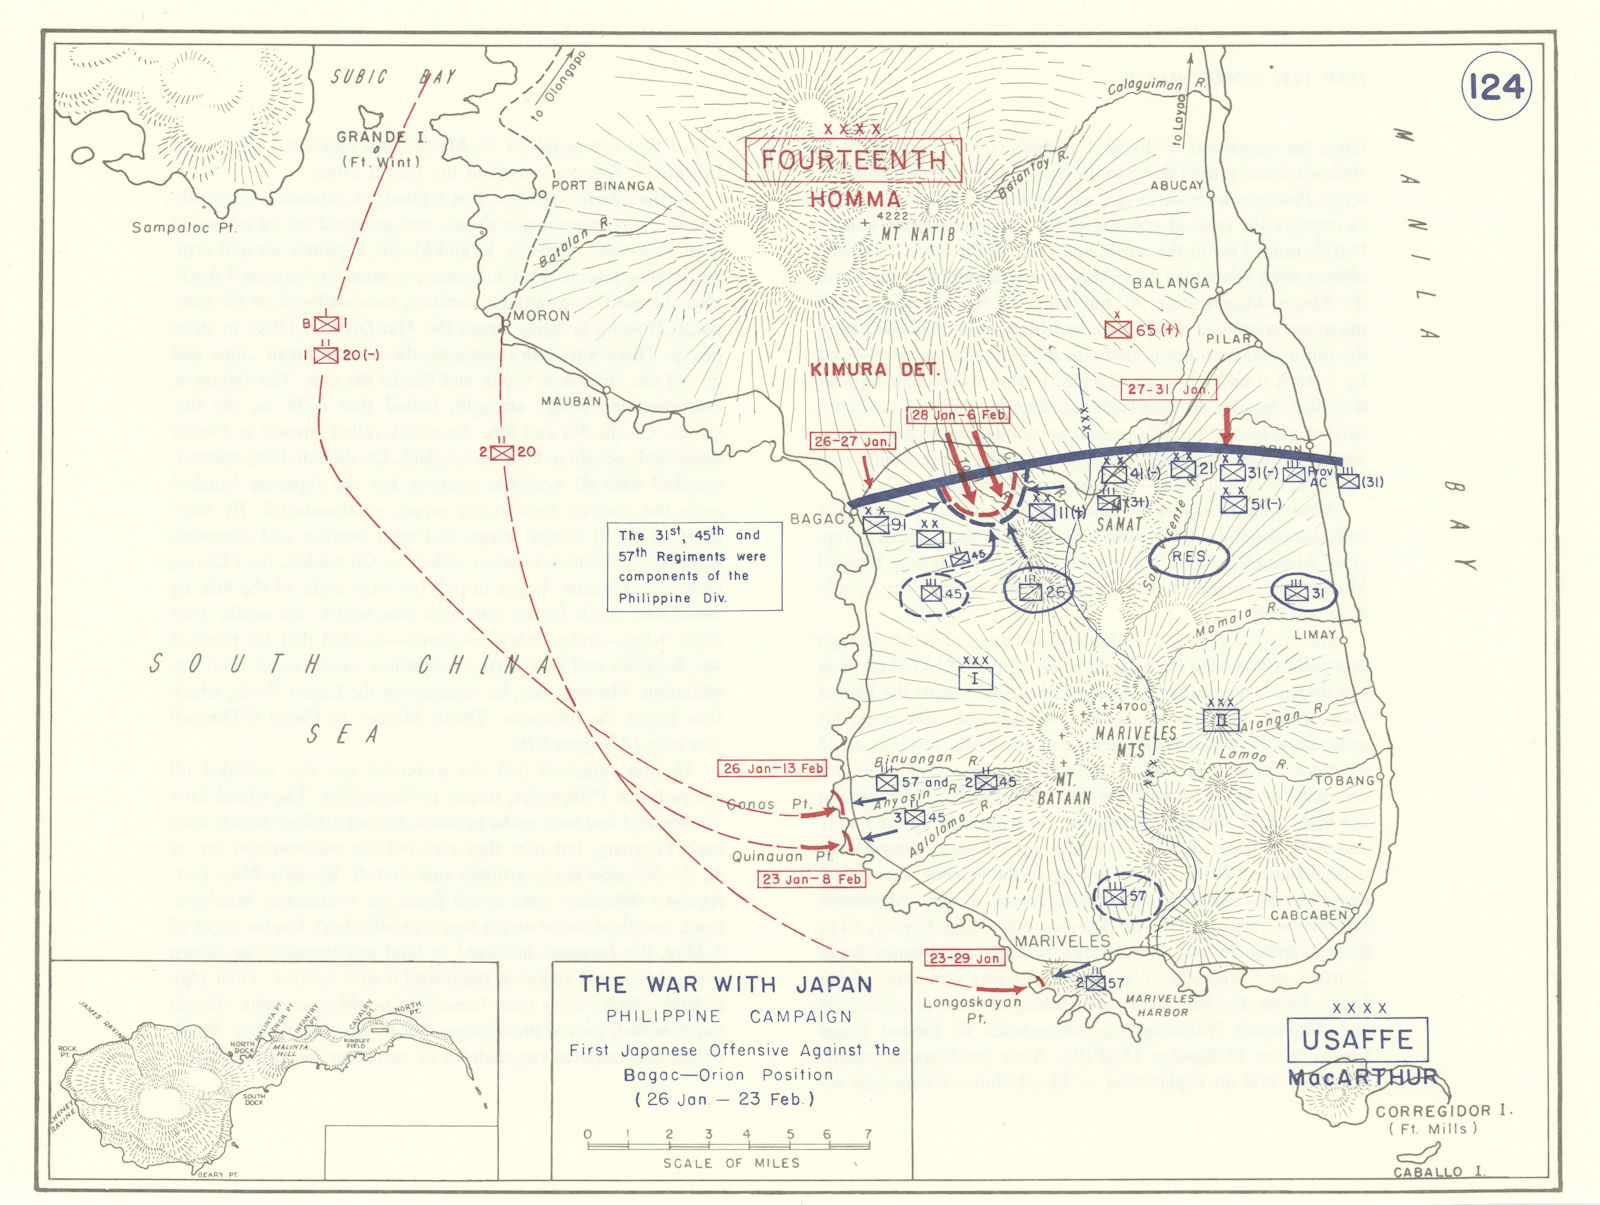 World War 2. Philippine Campaign Feb 1942 Japanese attack Bagac-Orion 1959 map